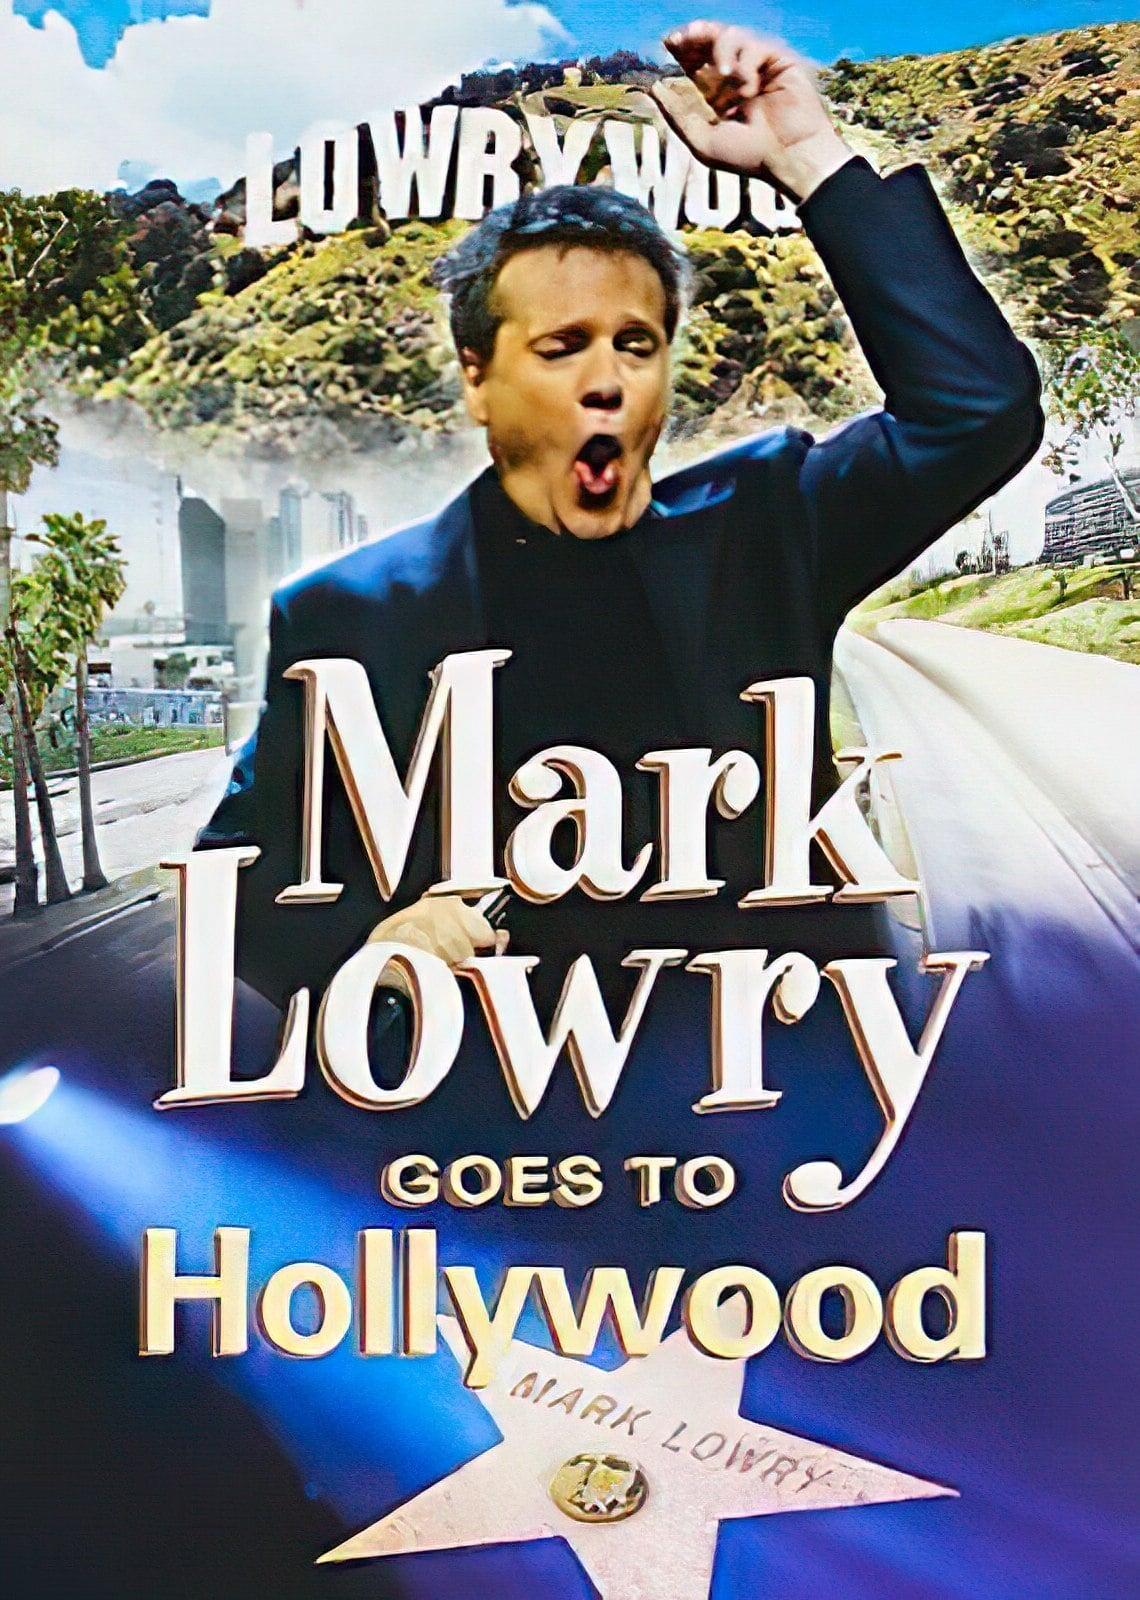 Mark Lowry Goes to Hollywood poster